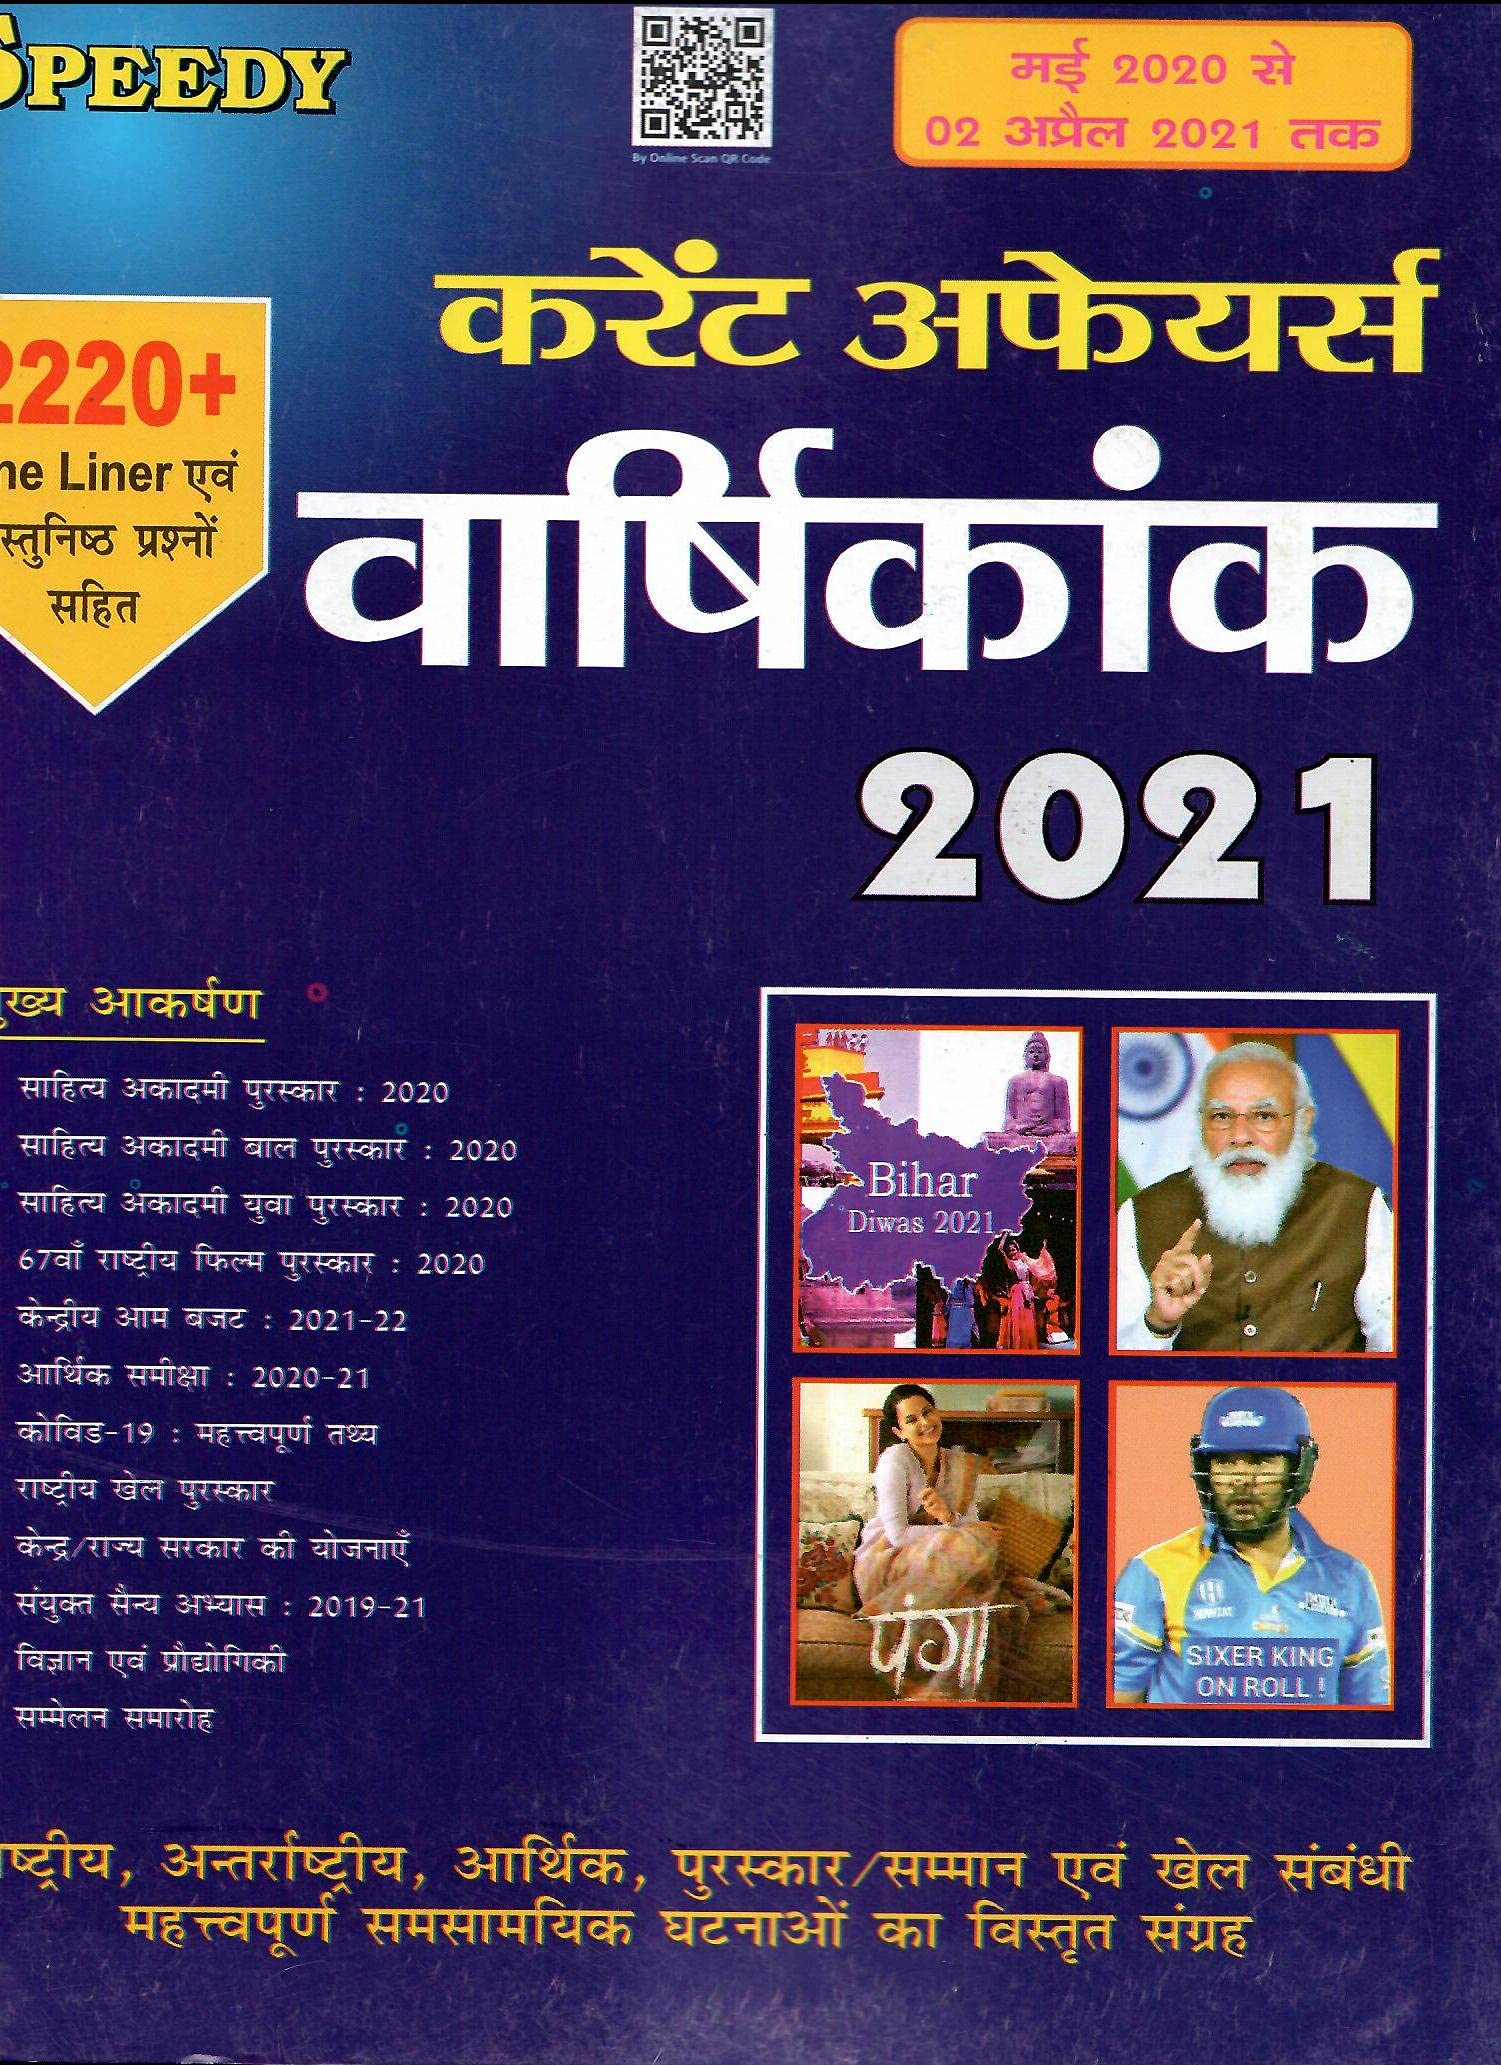 Pdf Speedy Current Affairs Hindi April 2021 Latest Release All Important Events Covered 7233